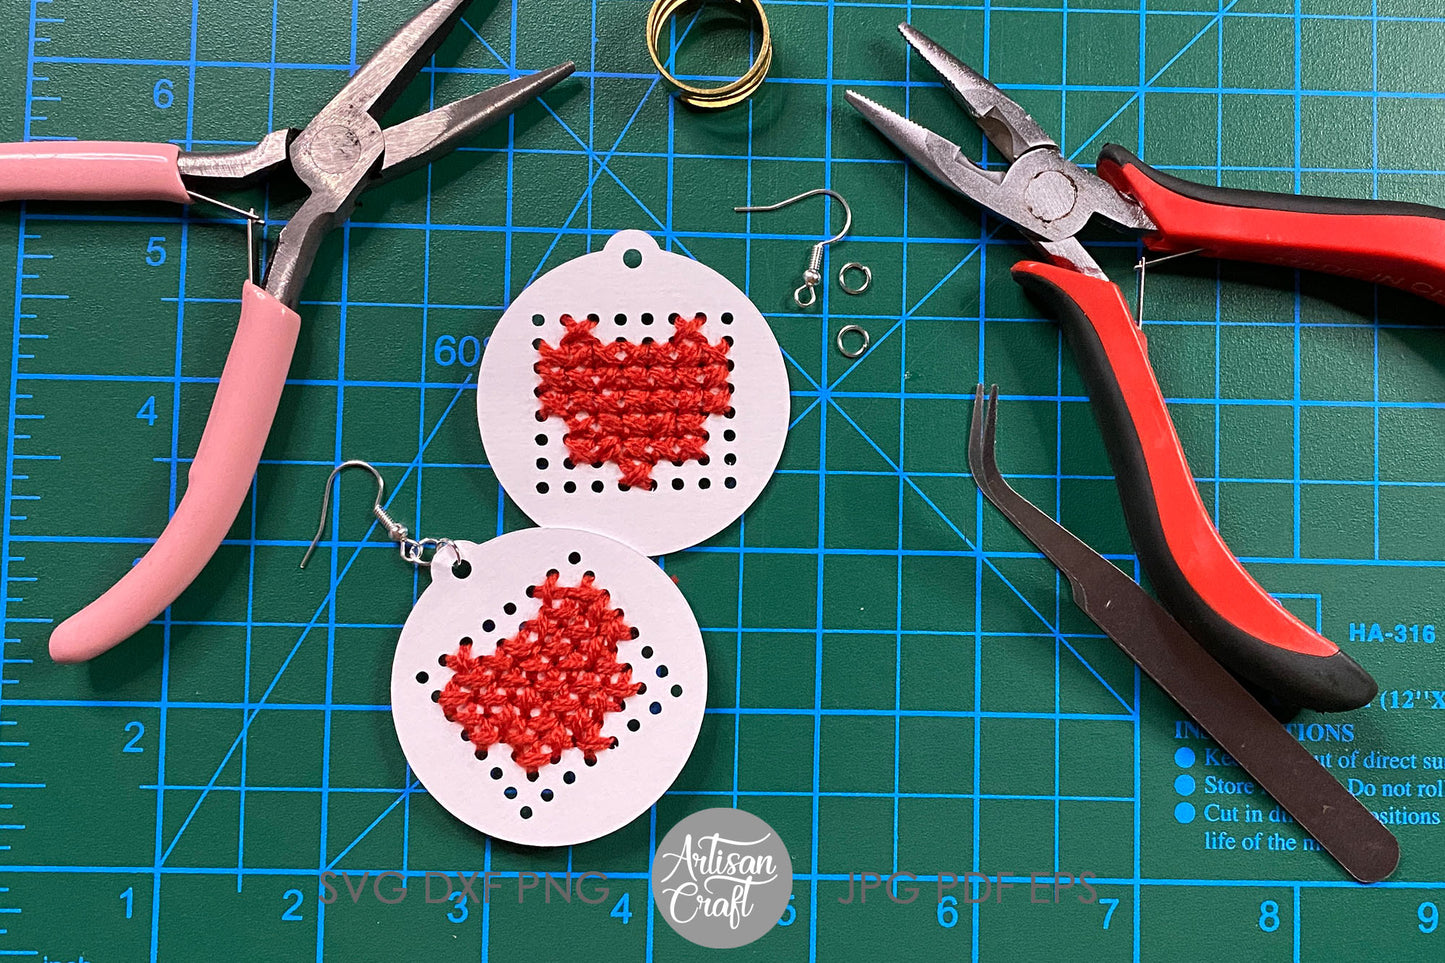 Cross stitch earrings with patterns & SVG for laser cutting